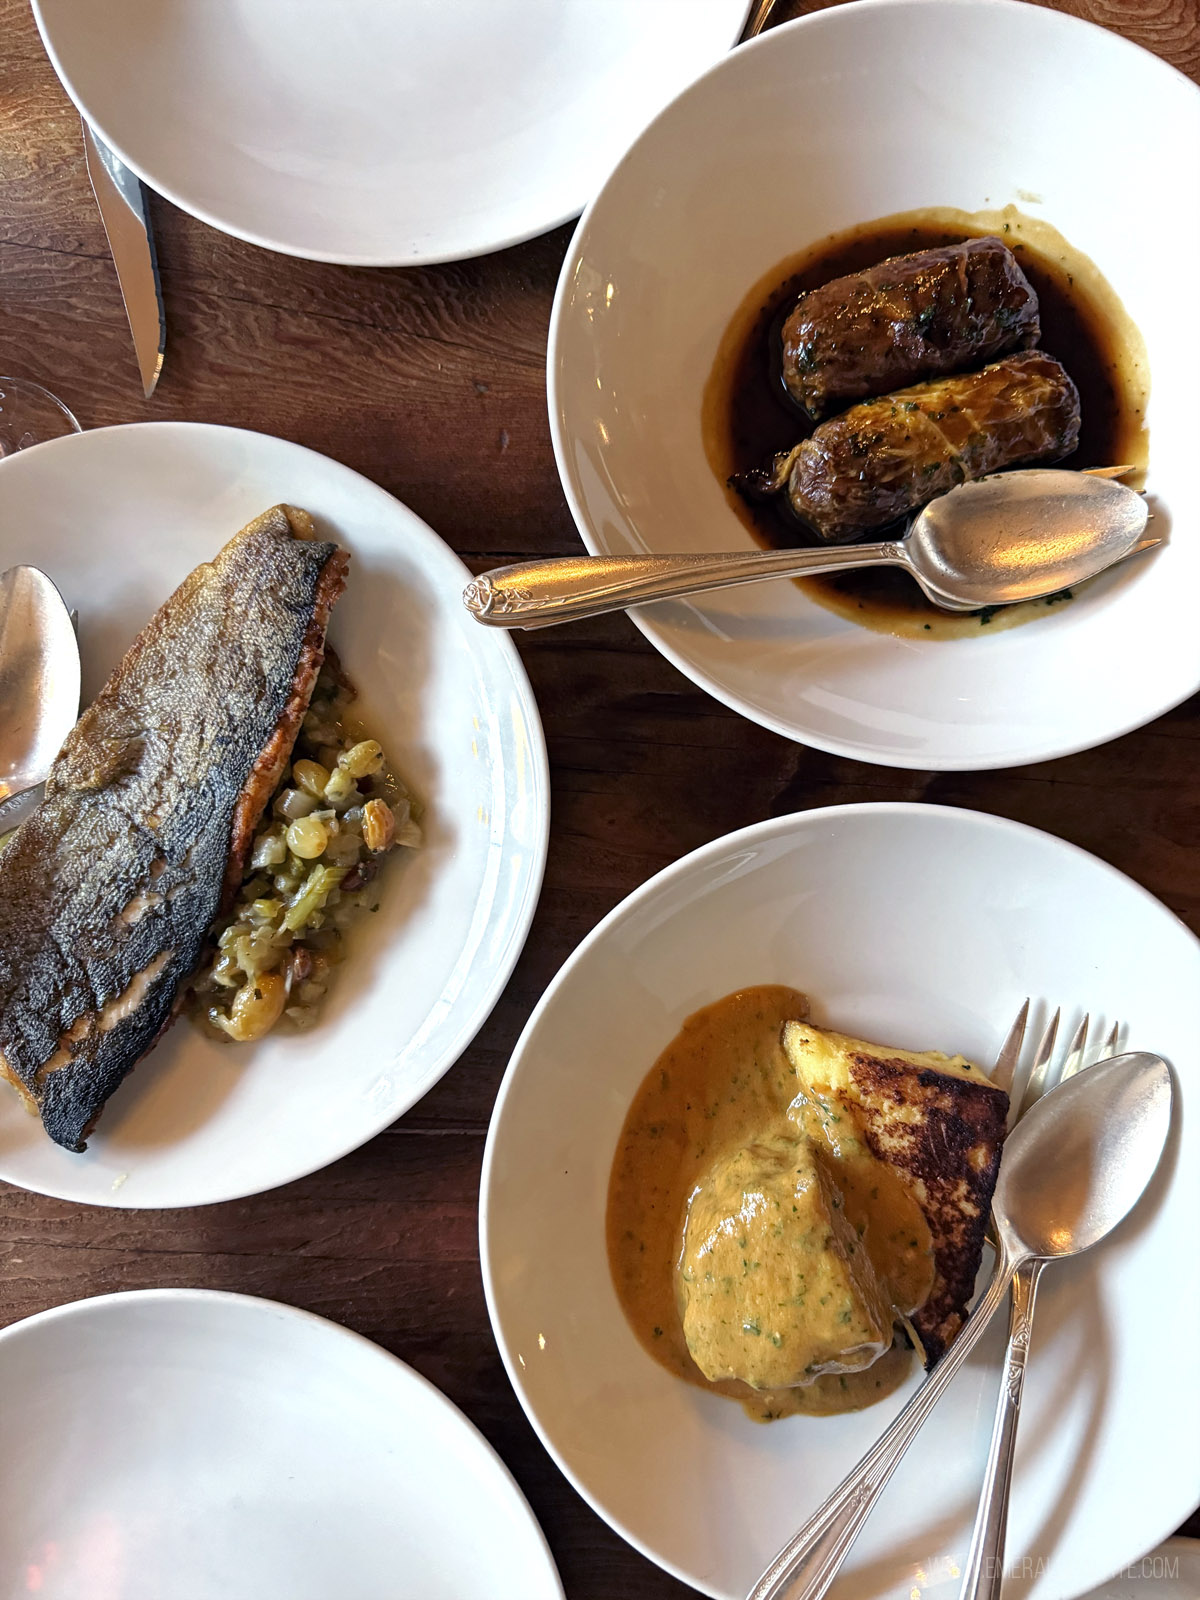 fish, cabbage rolls, and pork dishes at an Italian restaurant in Seattle